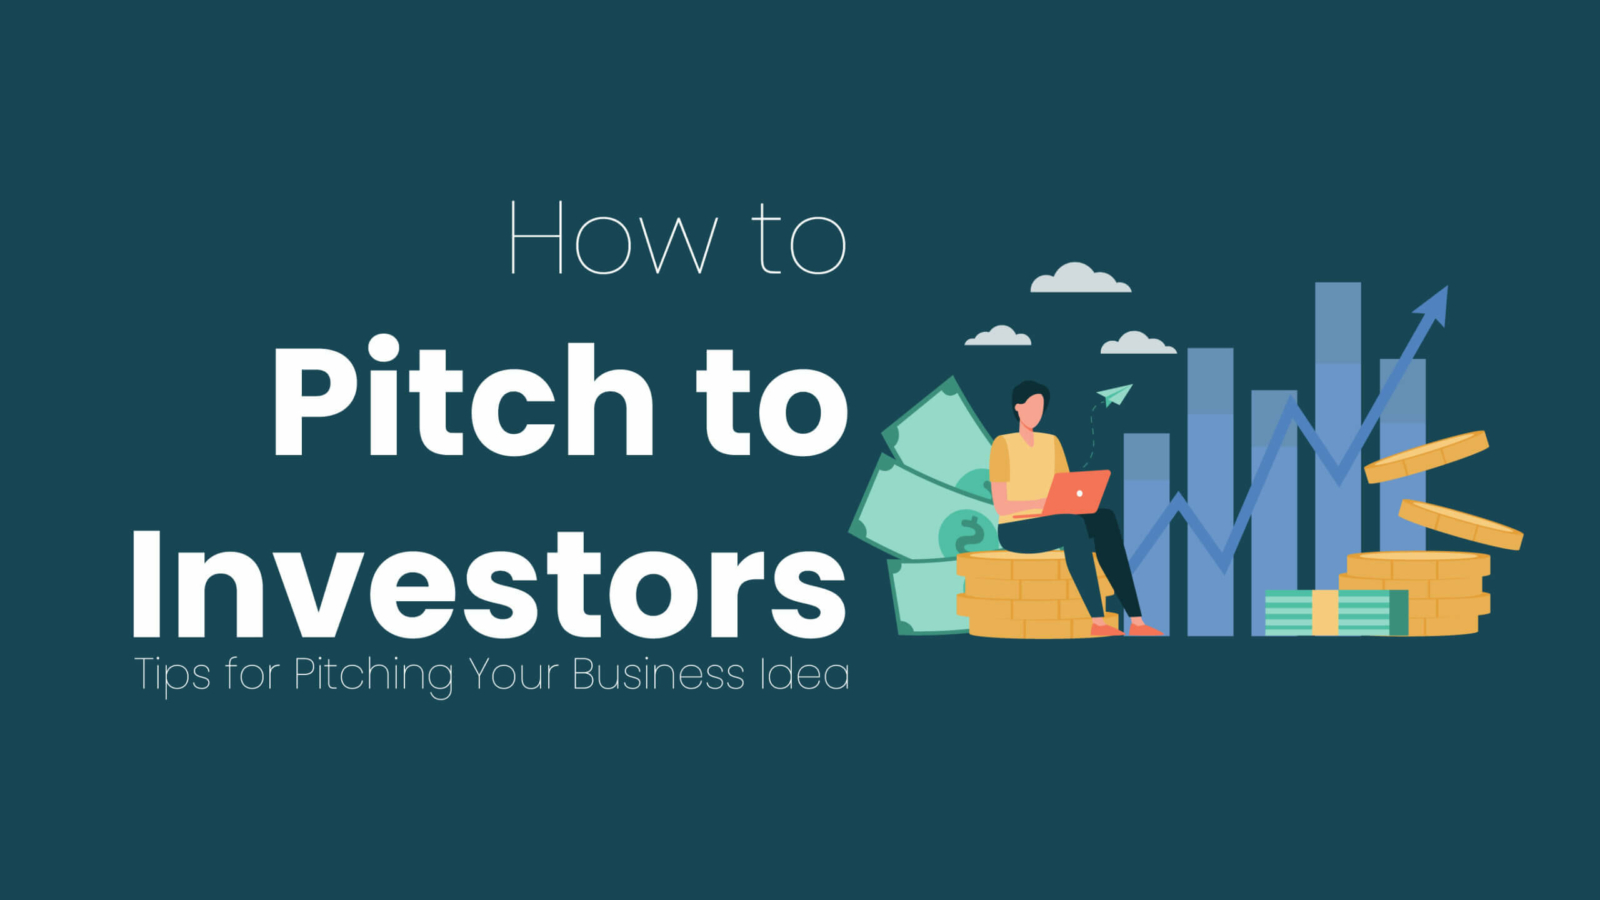 Pitch Your Business Idea to Investors